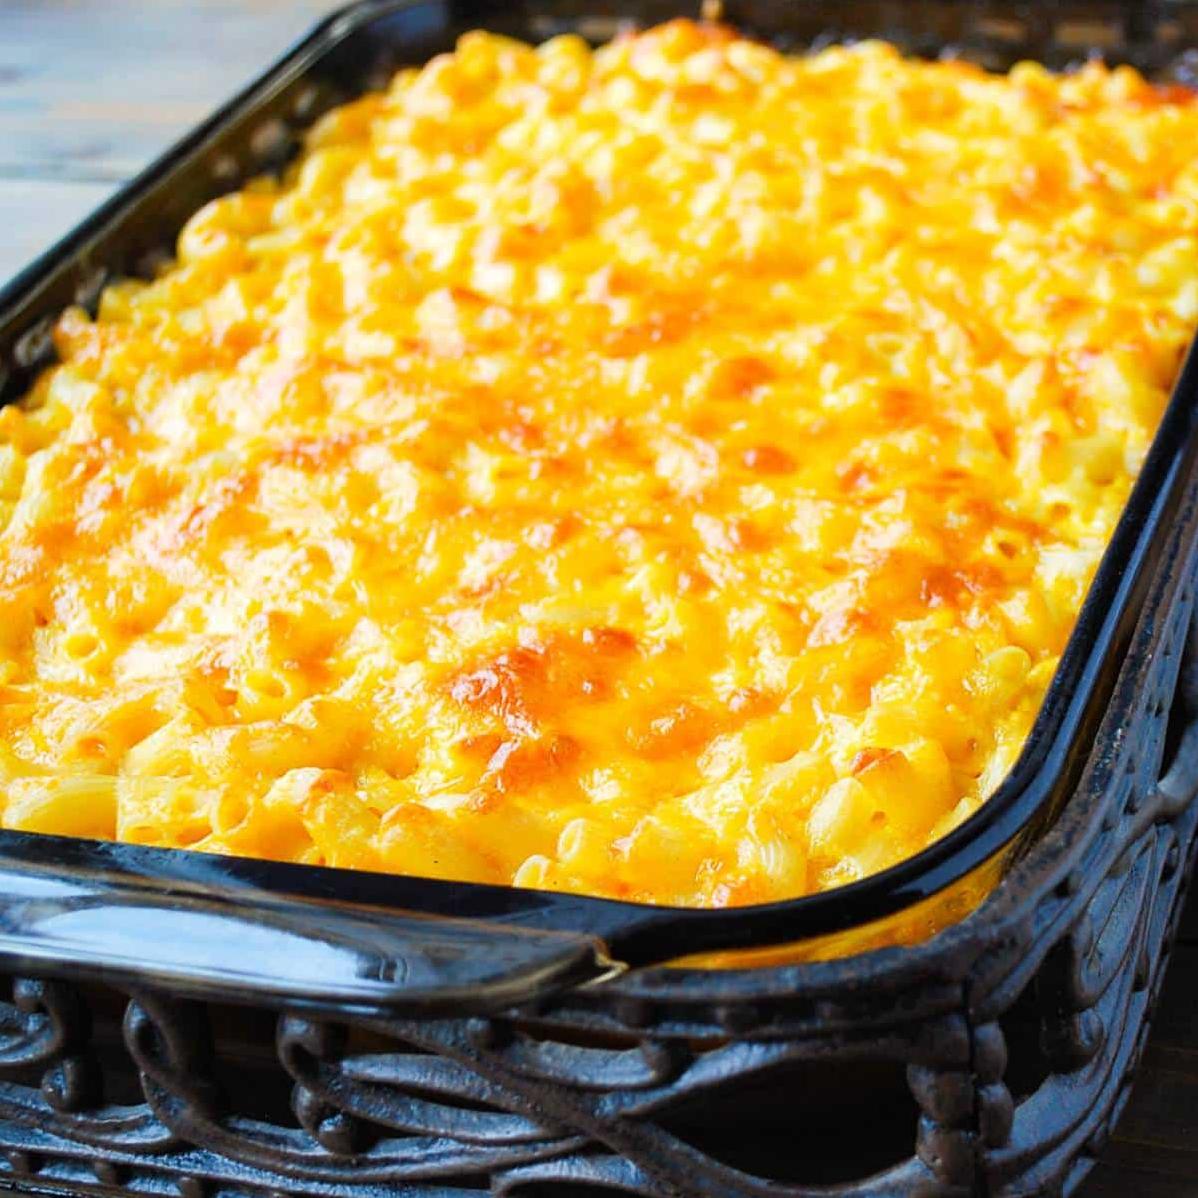  The perfect combination of gooey, melted cheese and al dente macaroni will make your taste buds dance.